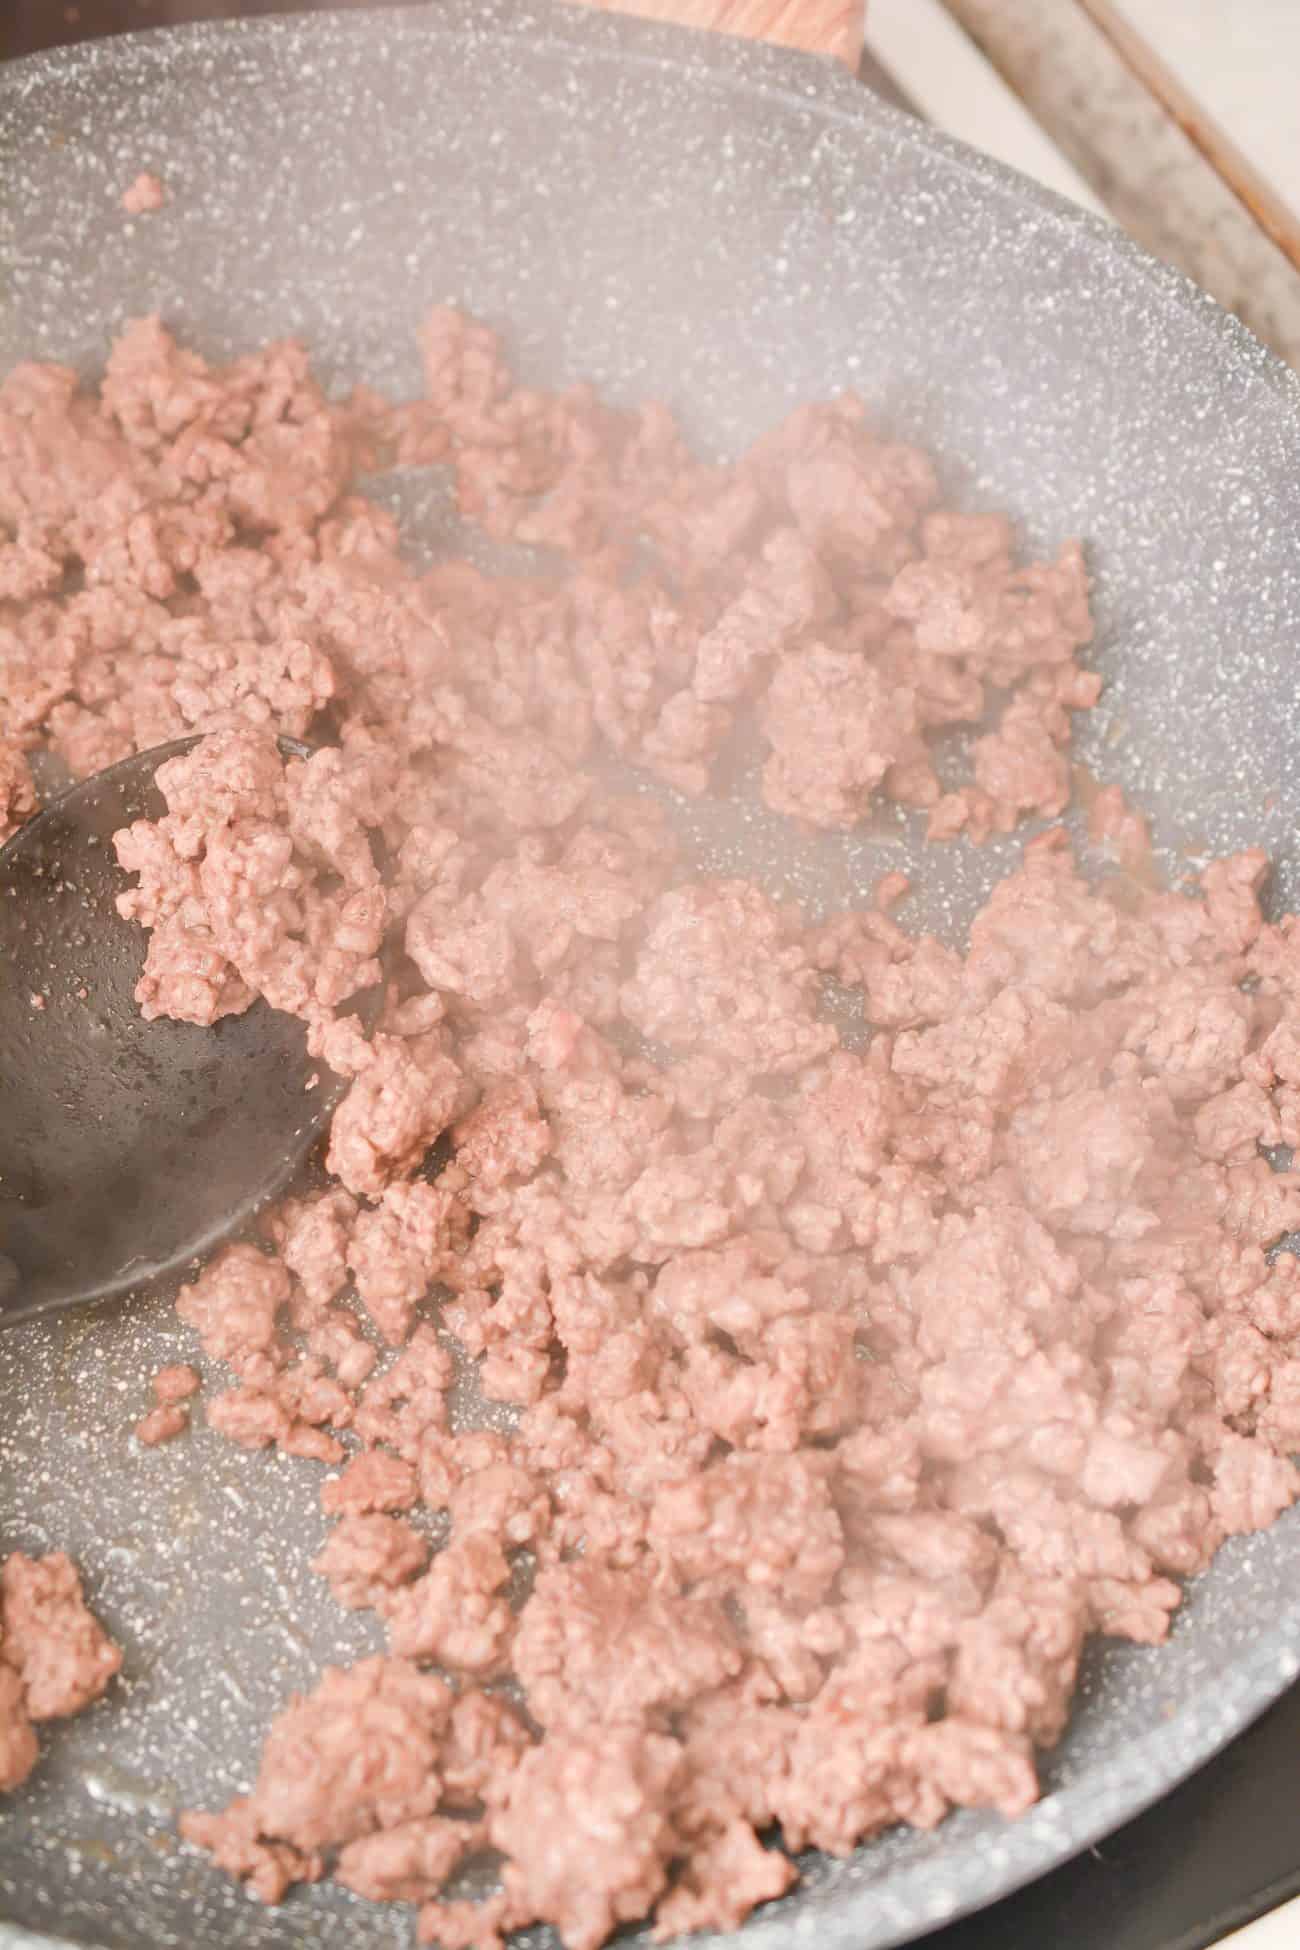 Brown the ground beef seasoned with salt, pepper, and garlic powder to taste over medium-high heat in a large deep-sided skillet until cooked through. Drain any excess grease.